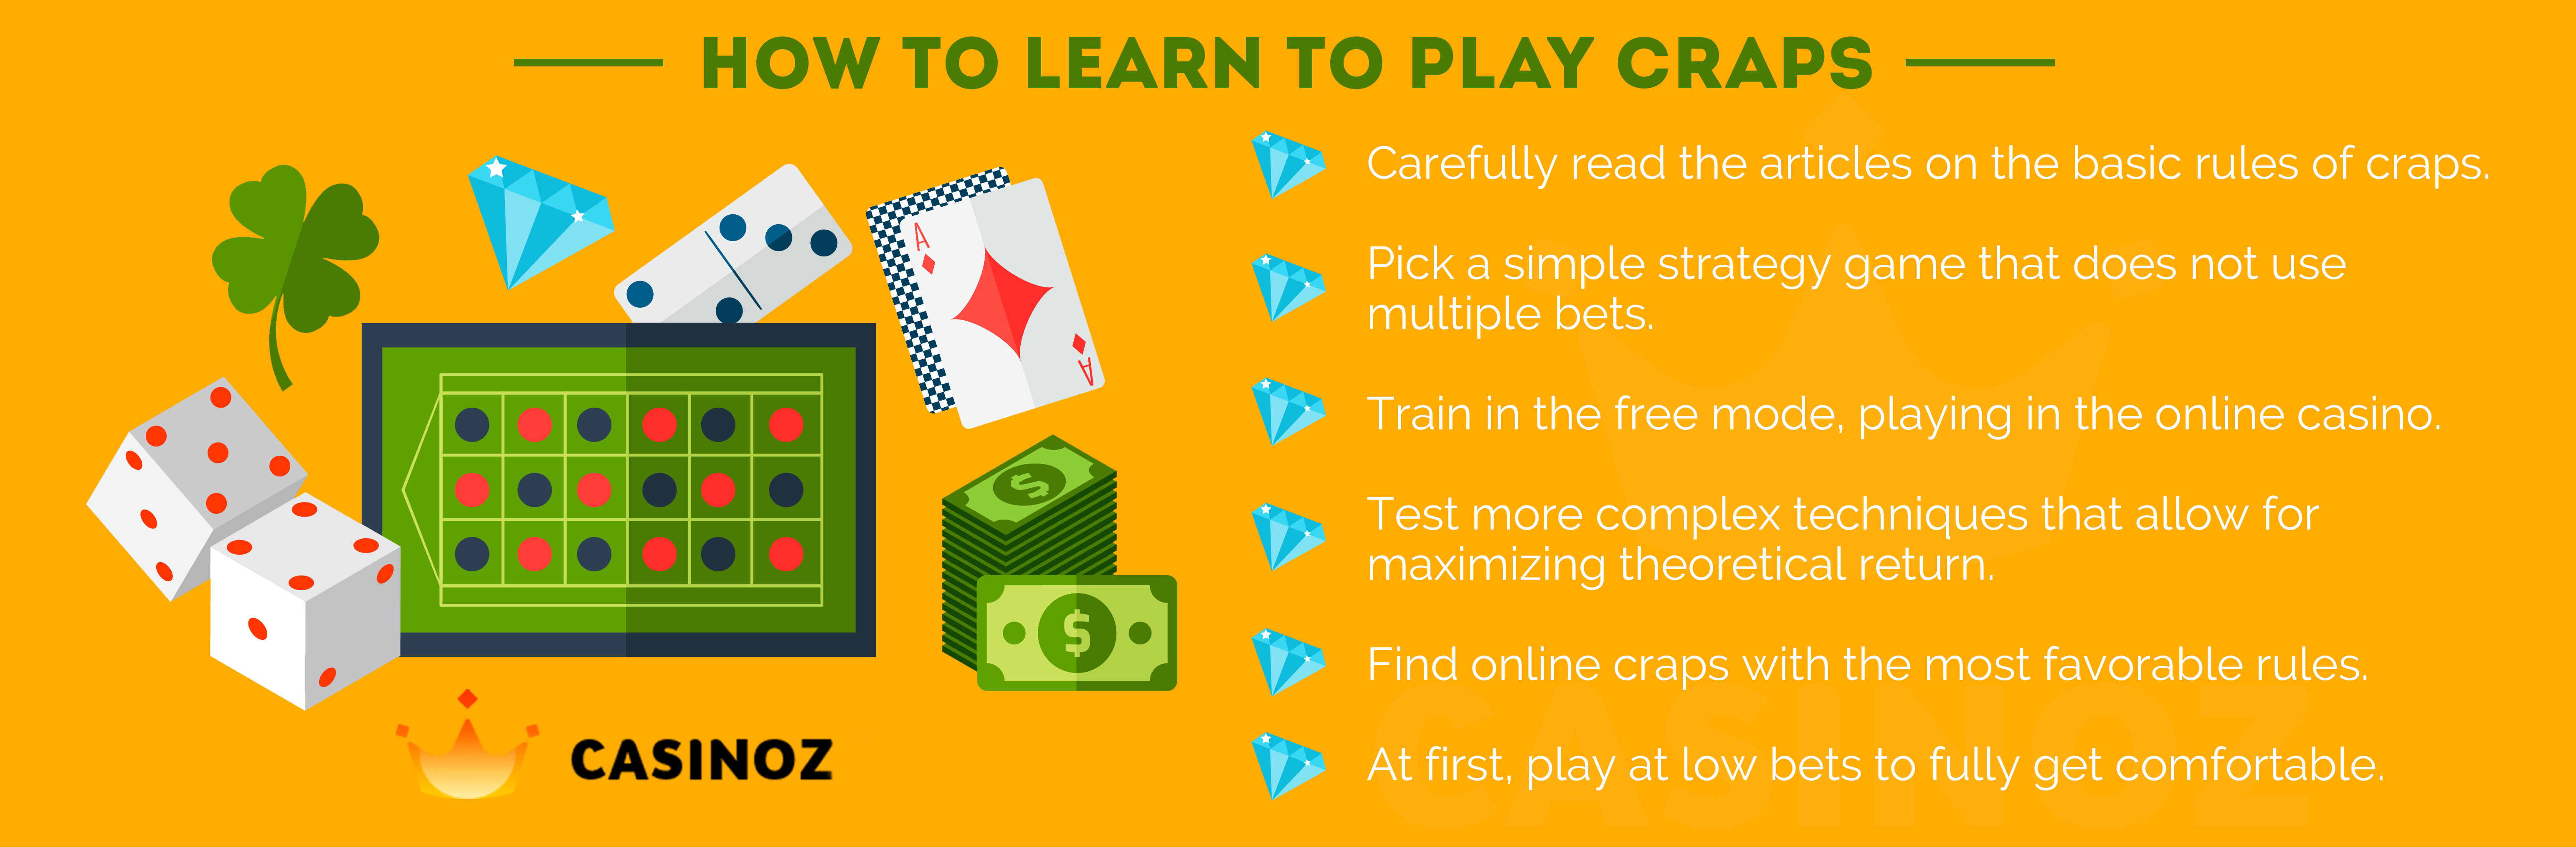 casino craps rules and strategy